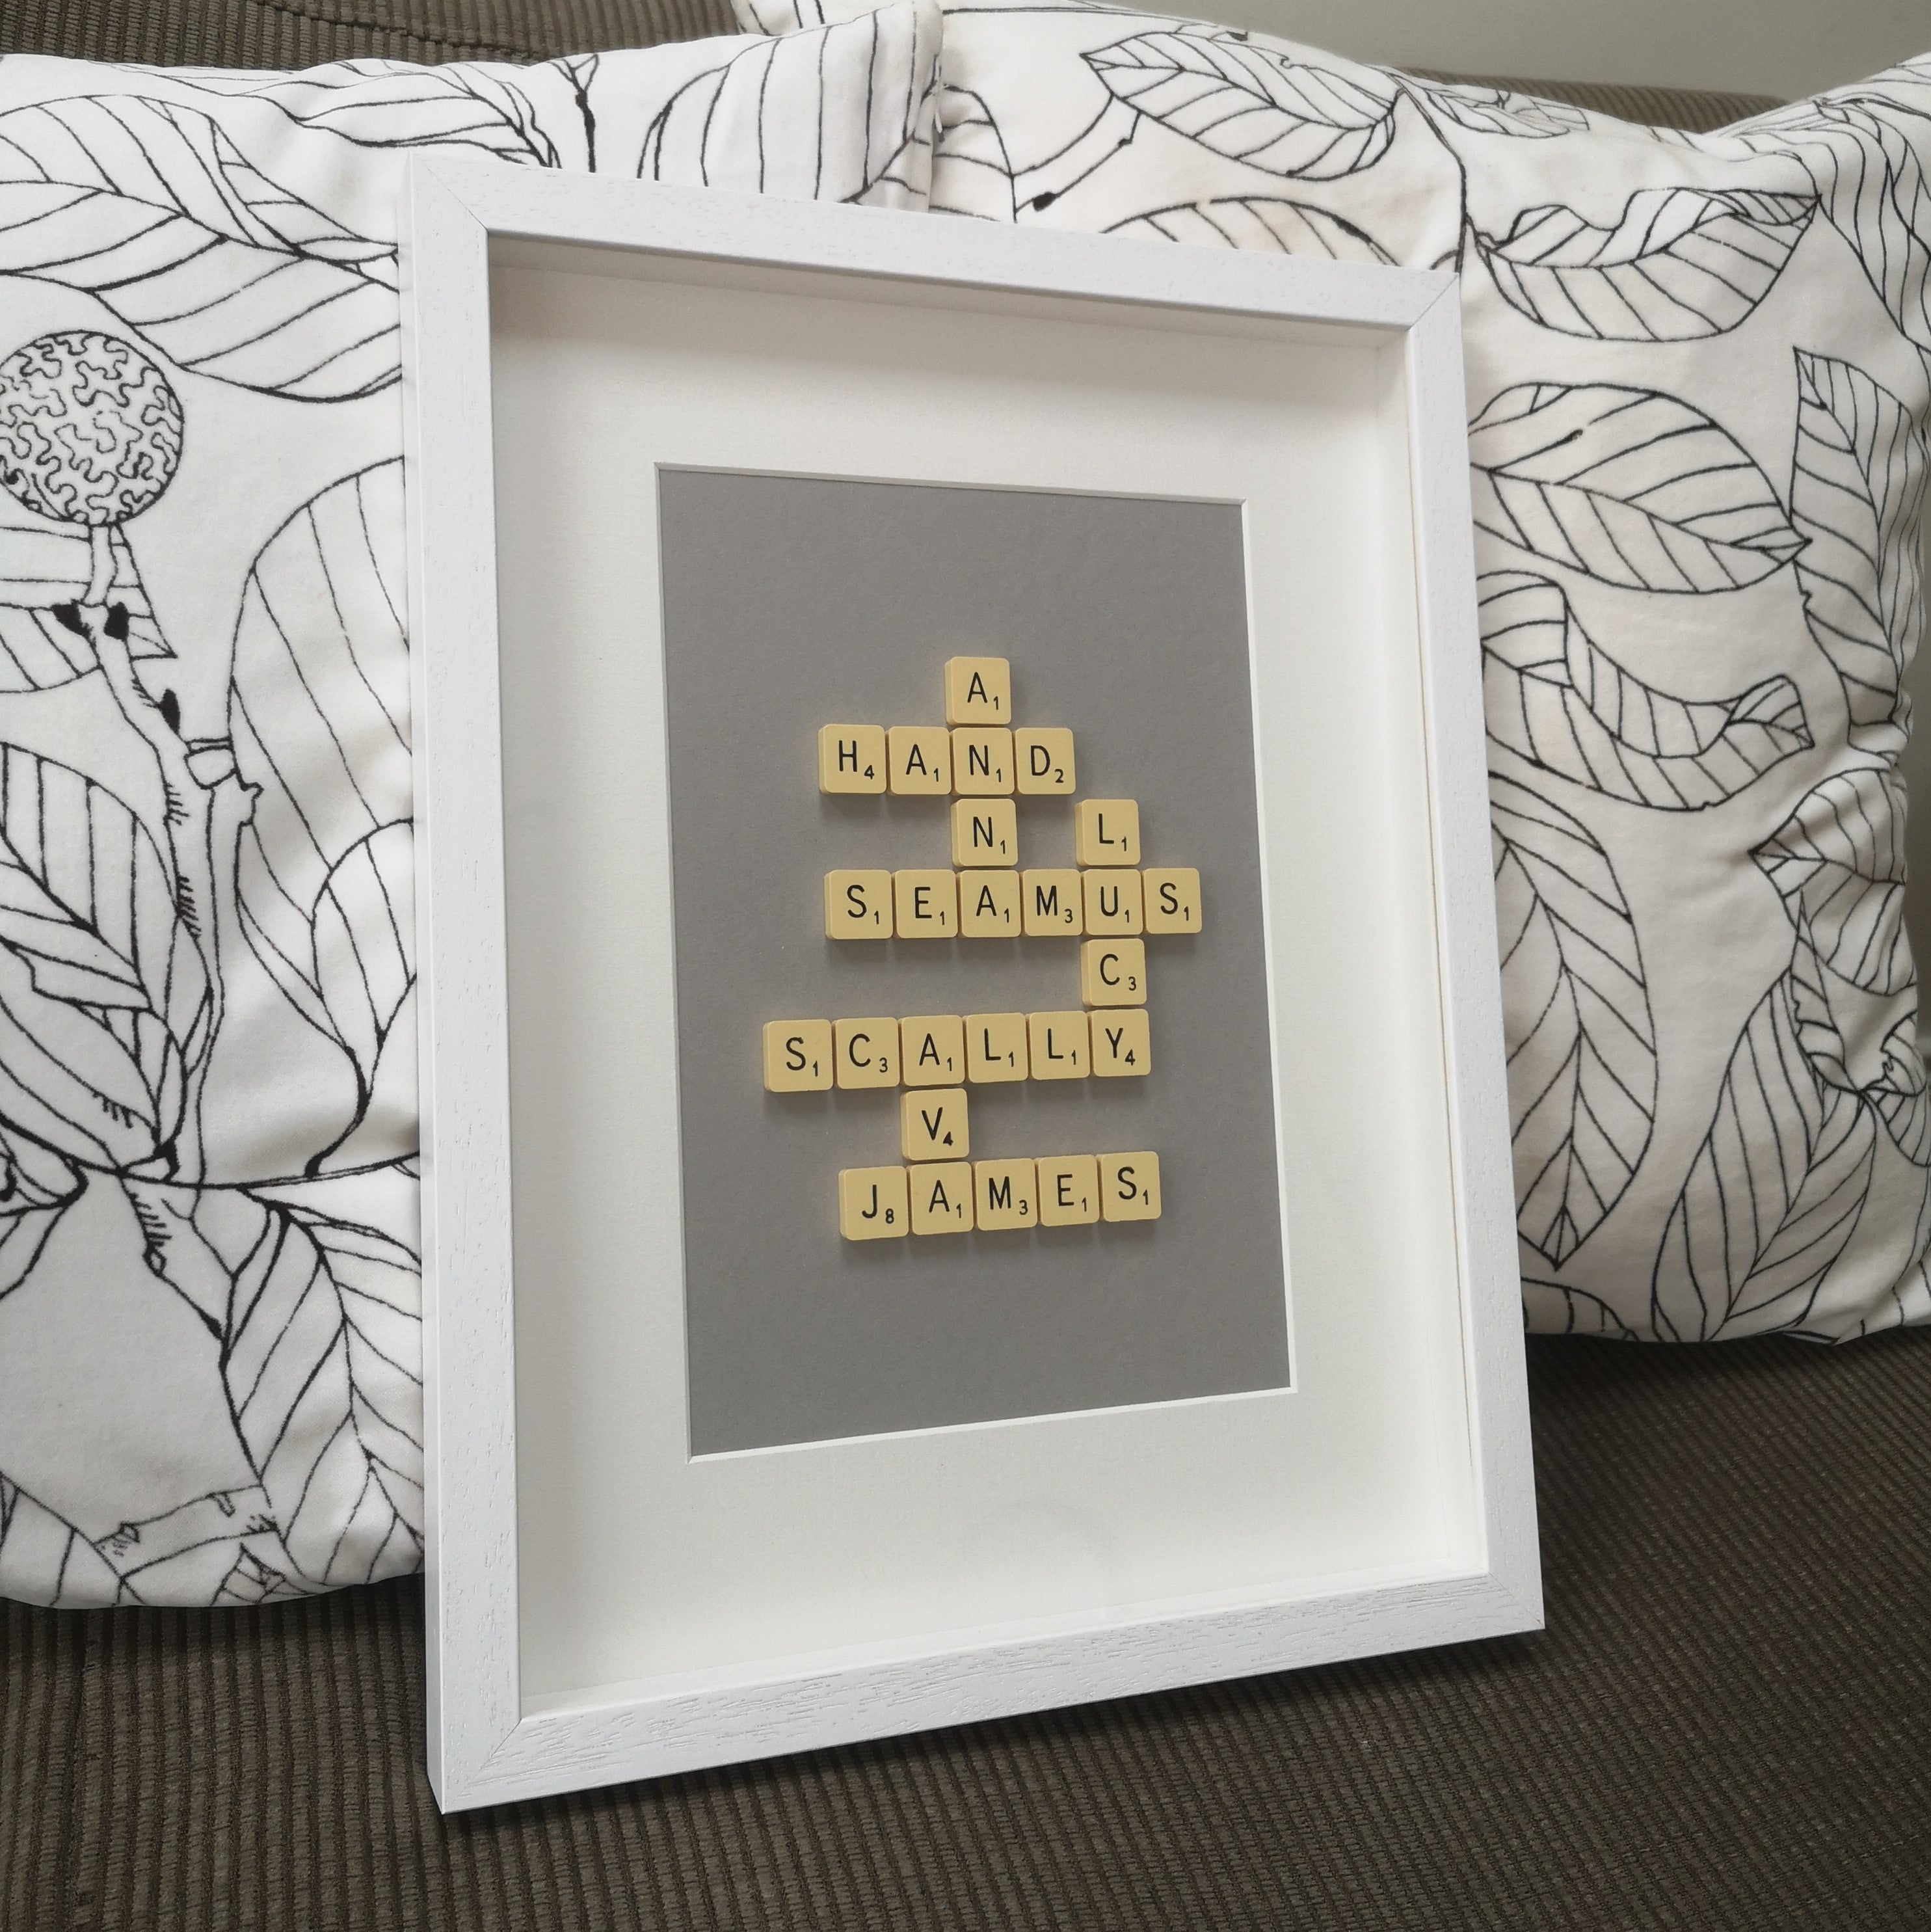 Personalised Family Scrabble name Frame with 7 names in vintage cream tiles, white frame and grey background